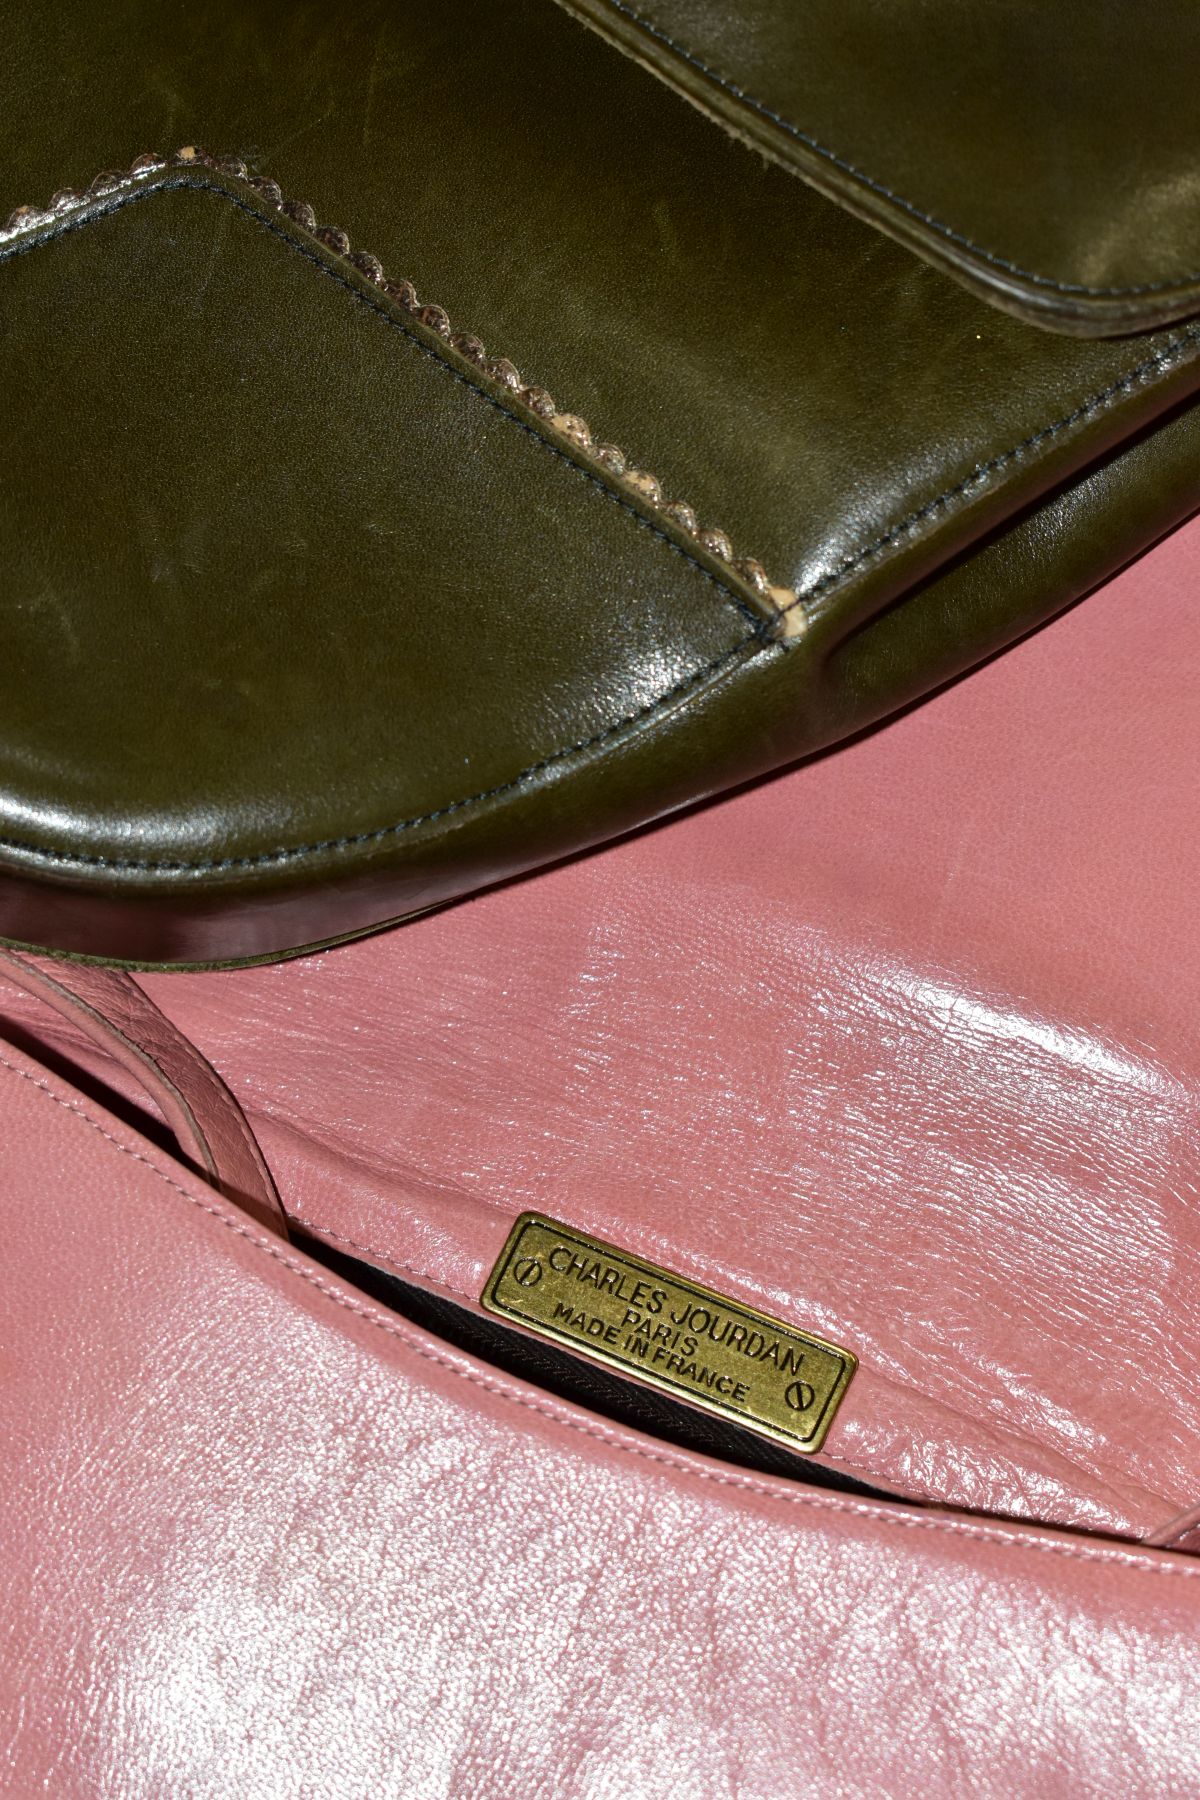 TWO CHARLES JOURDAN LEATHER HANDBAGS, one in pink with 55cm shoulder strap, the other in green - Image 3 of 4